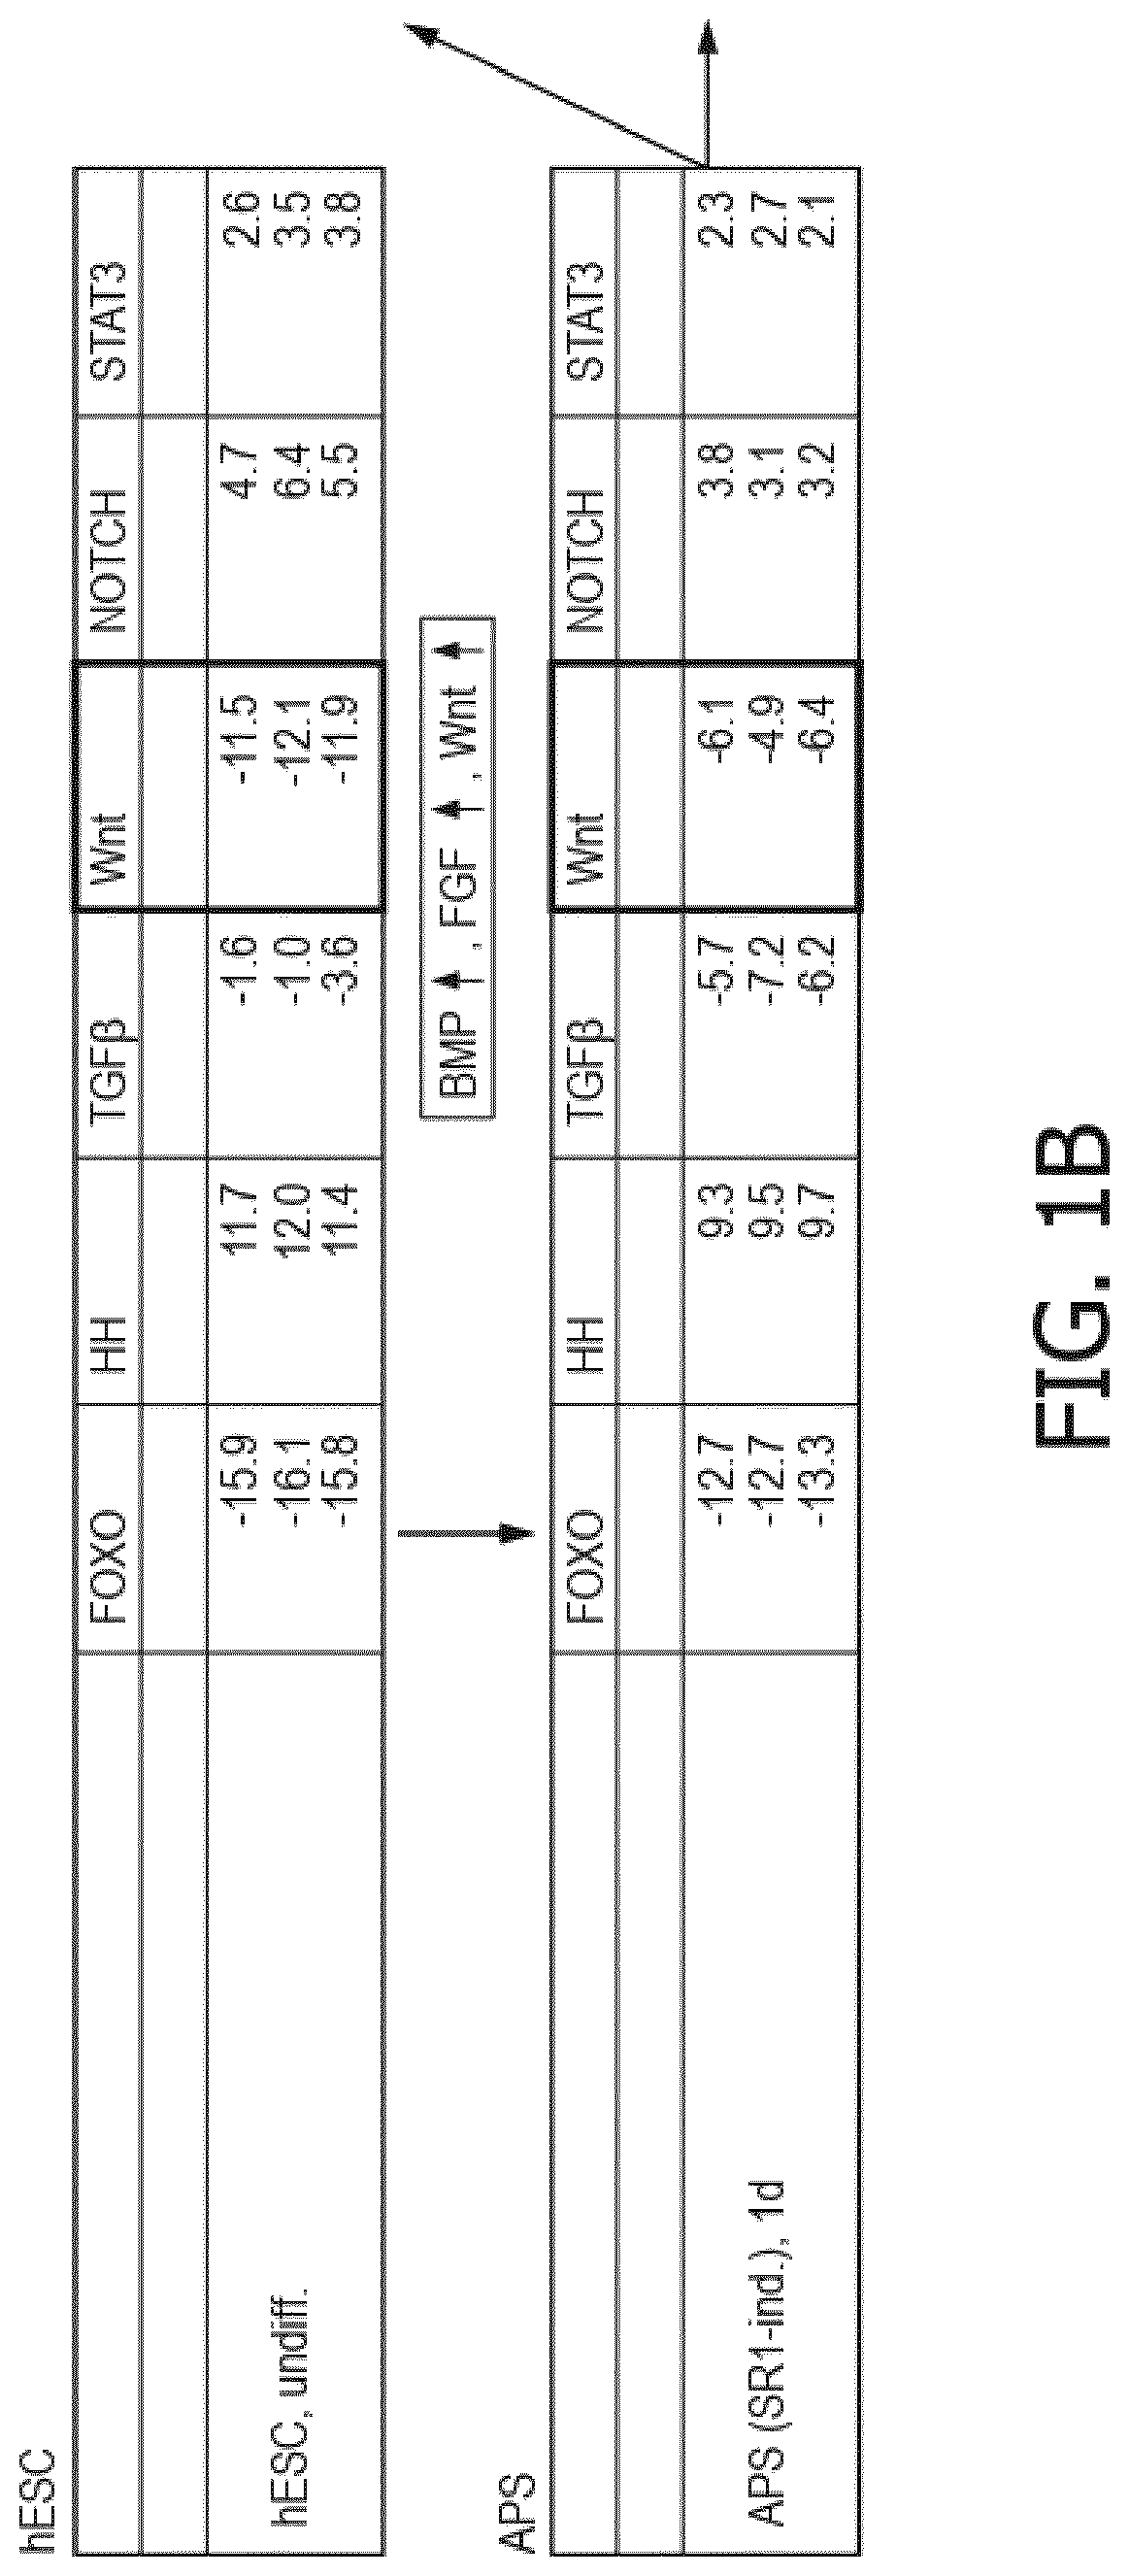 Functionalized substrate to manipulate cell function and differentiation